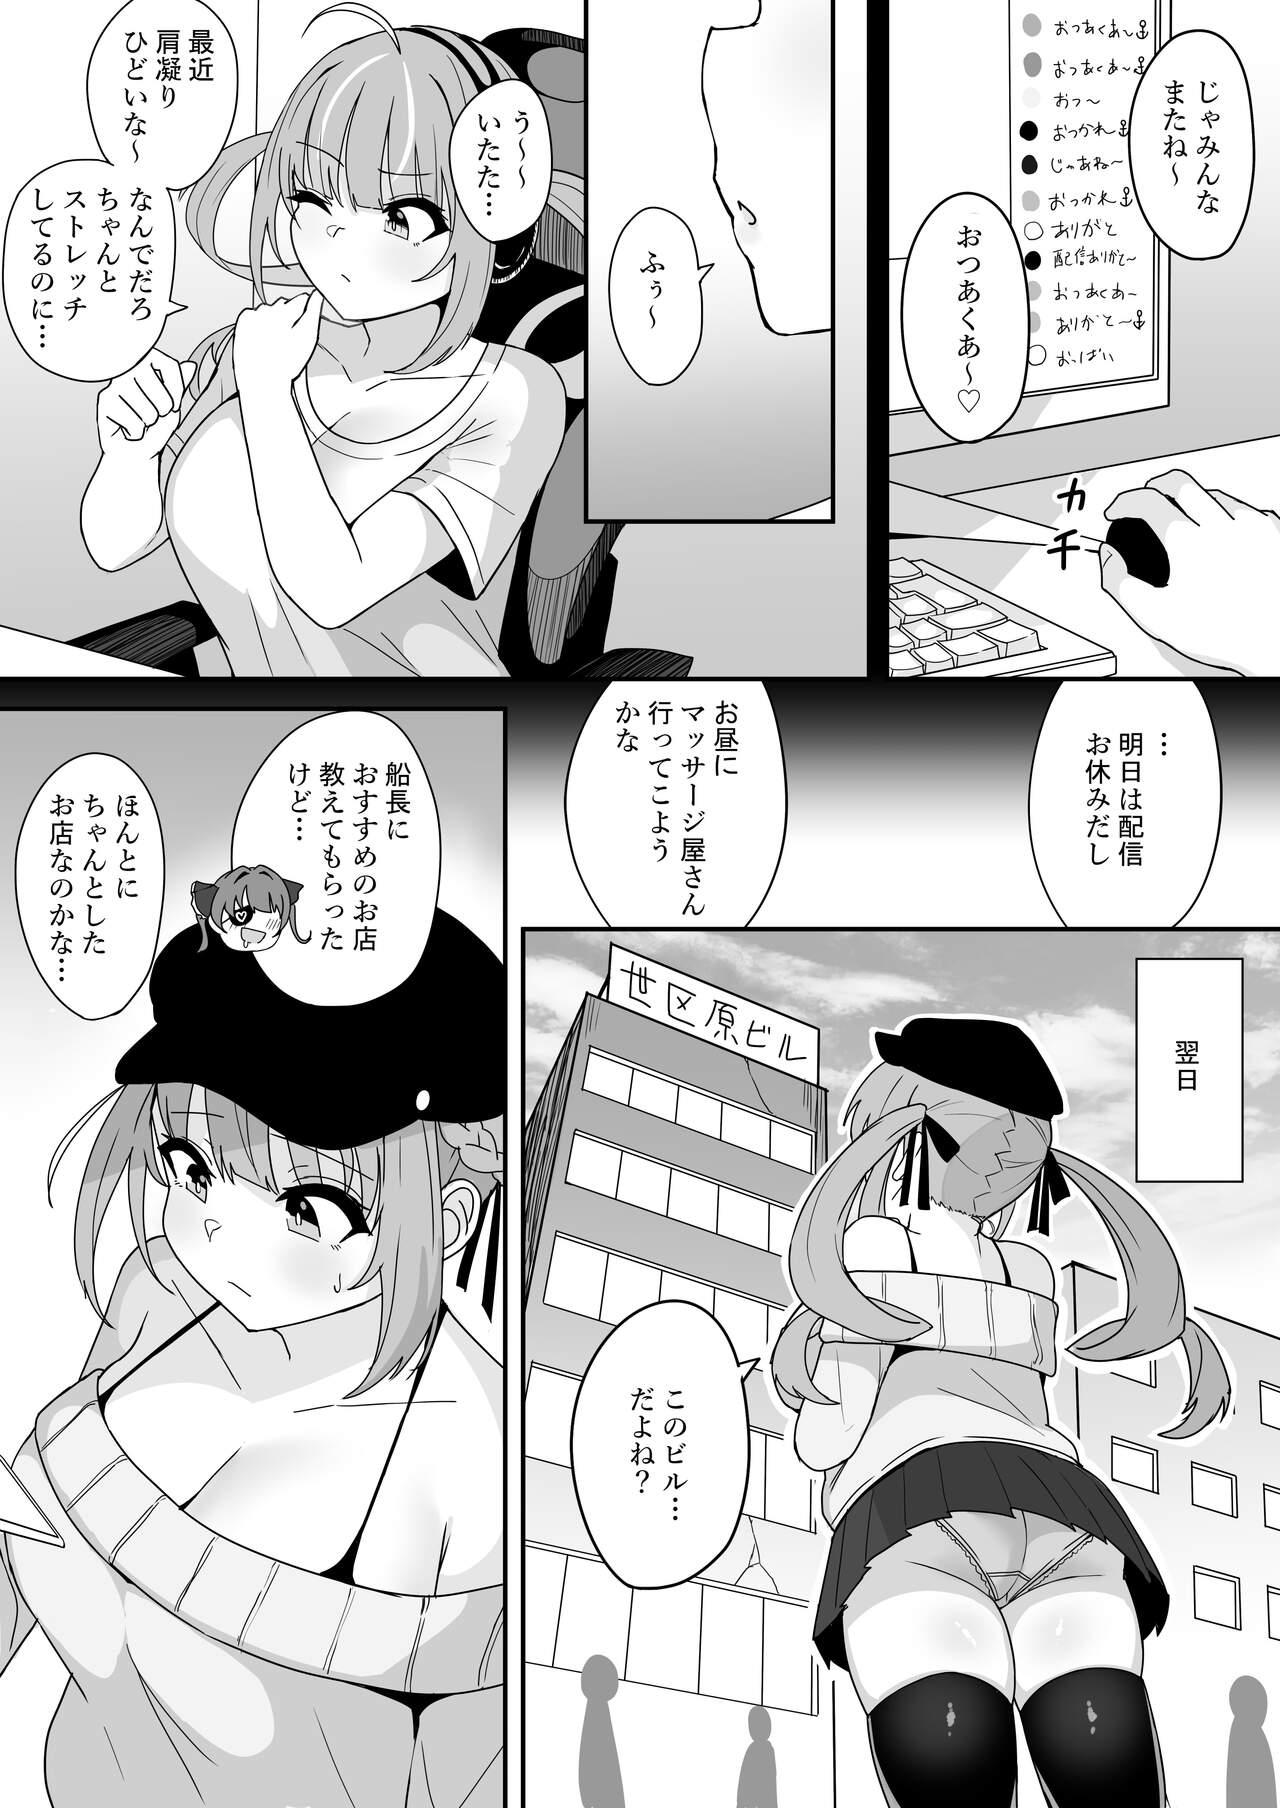 Milfs Aqua Gets Sexually Harassed at a Massage Parlor - Hololive Camwhore - Page 1